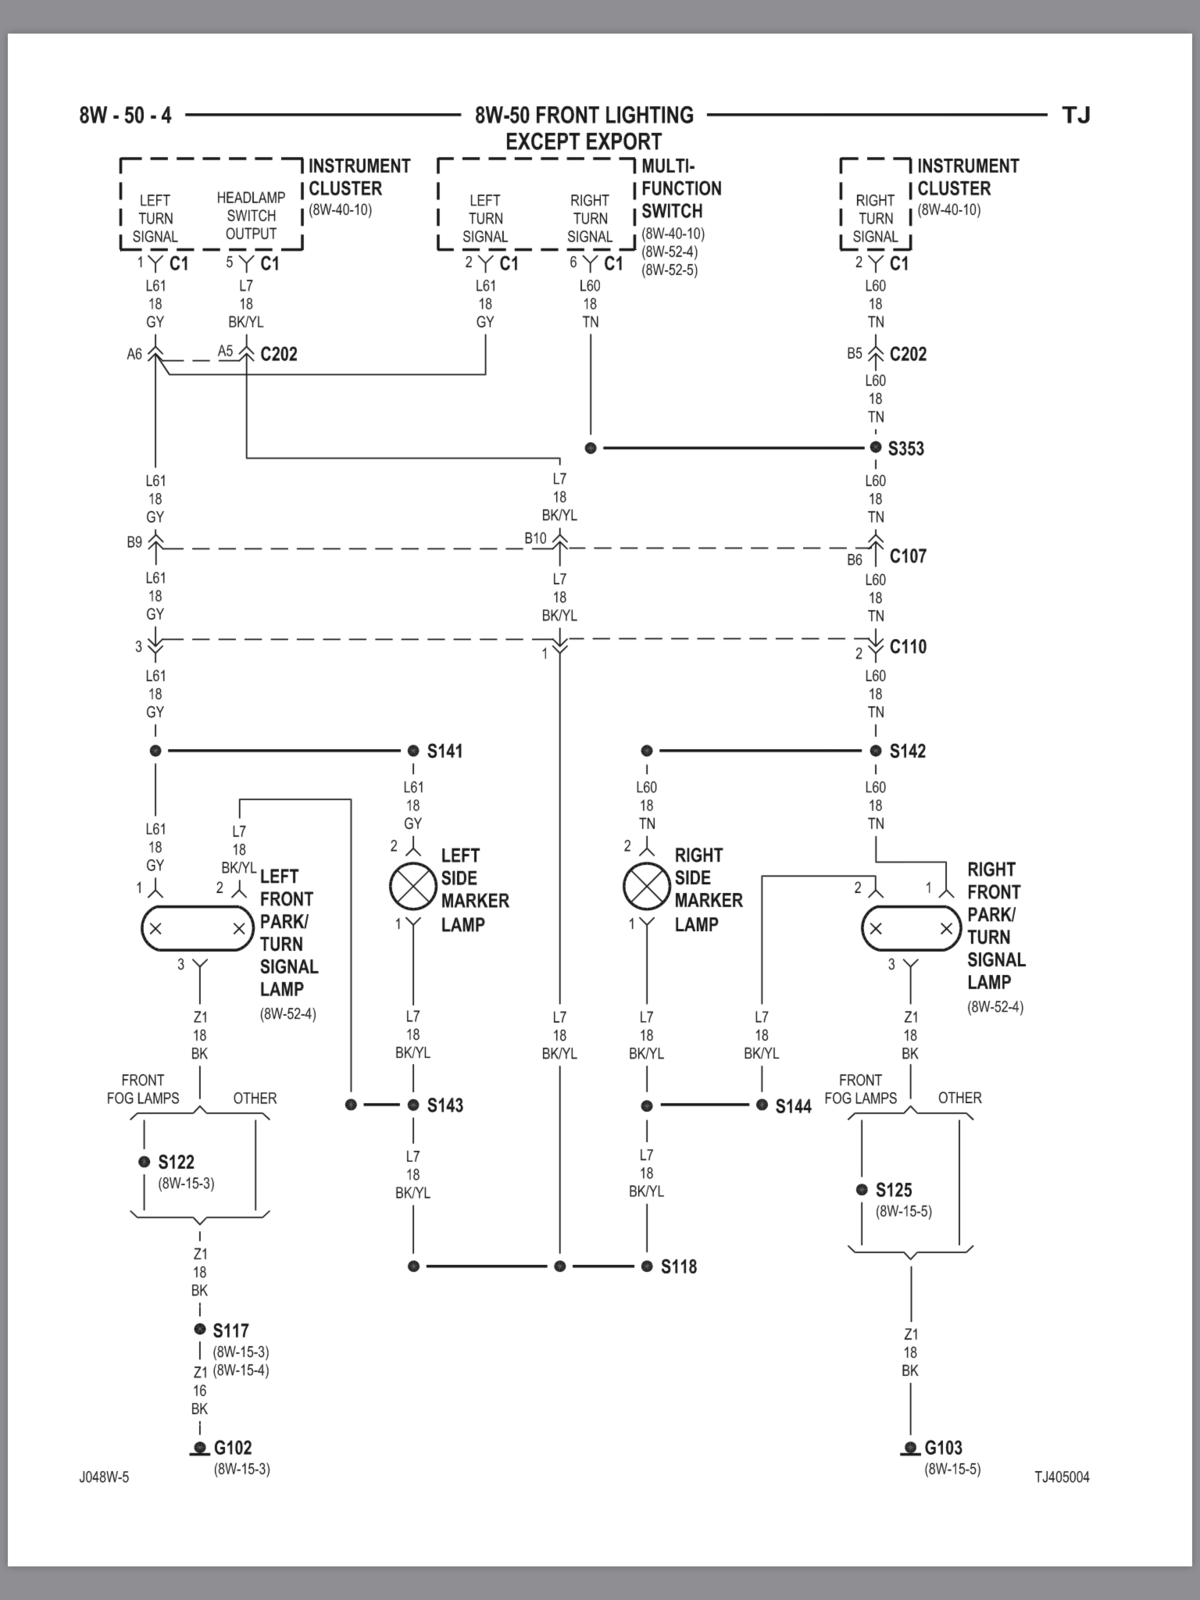 Wiring Guide or Diagram | Jeep Wrangler TJ Forum Jeep YJ Wiring Diagram Jeep Wrangler TJ Forum